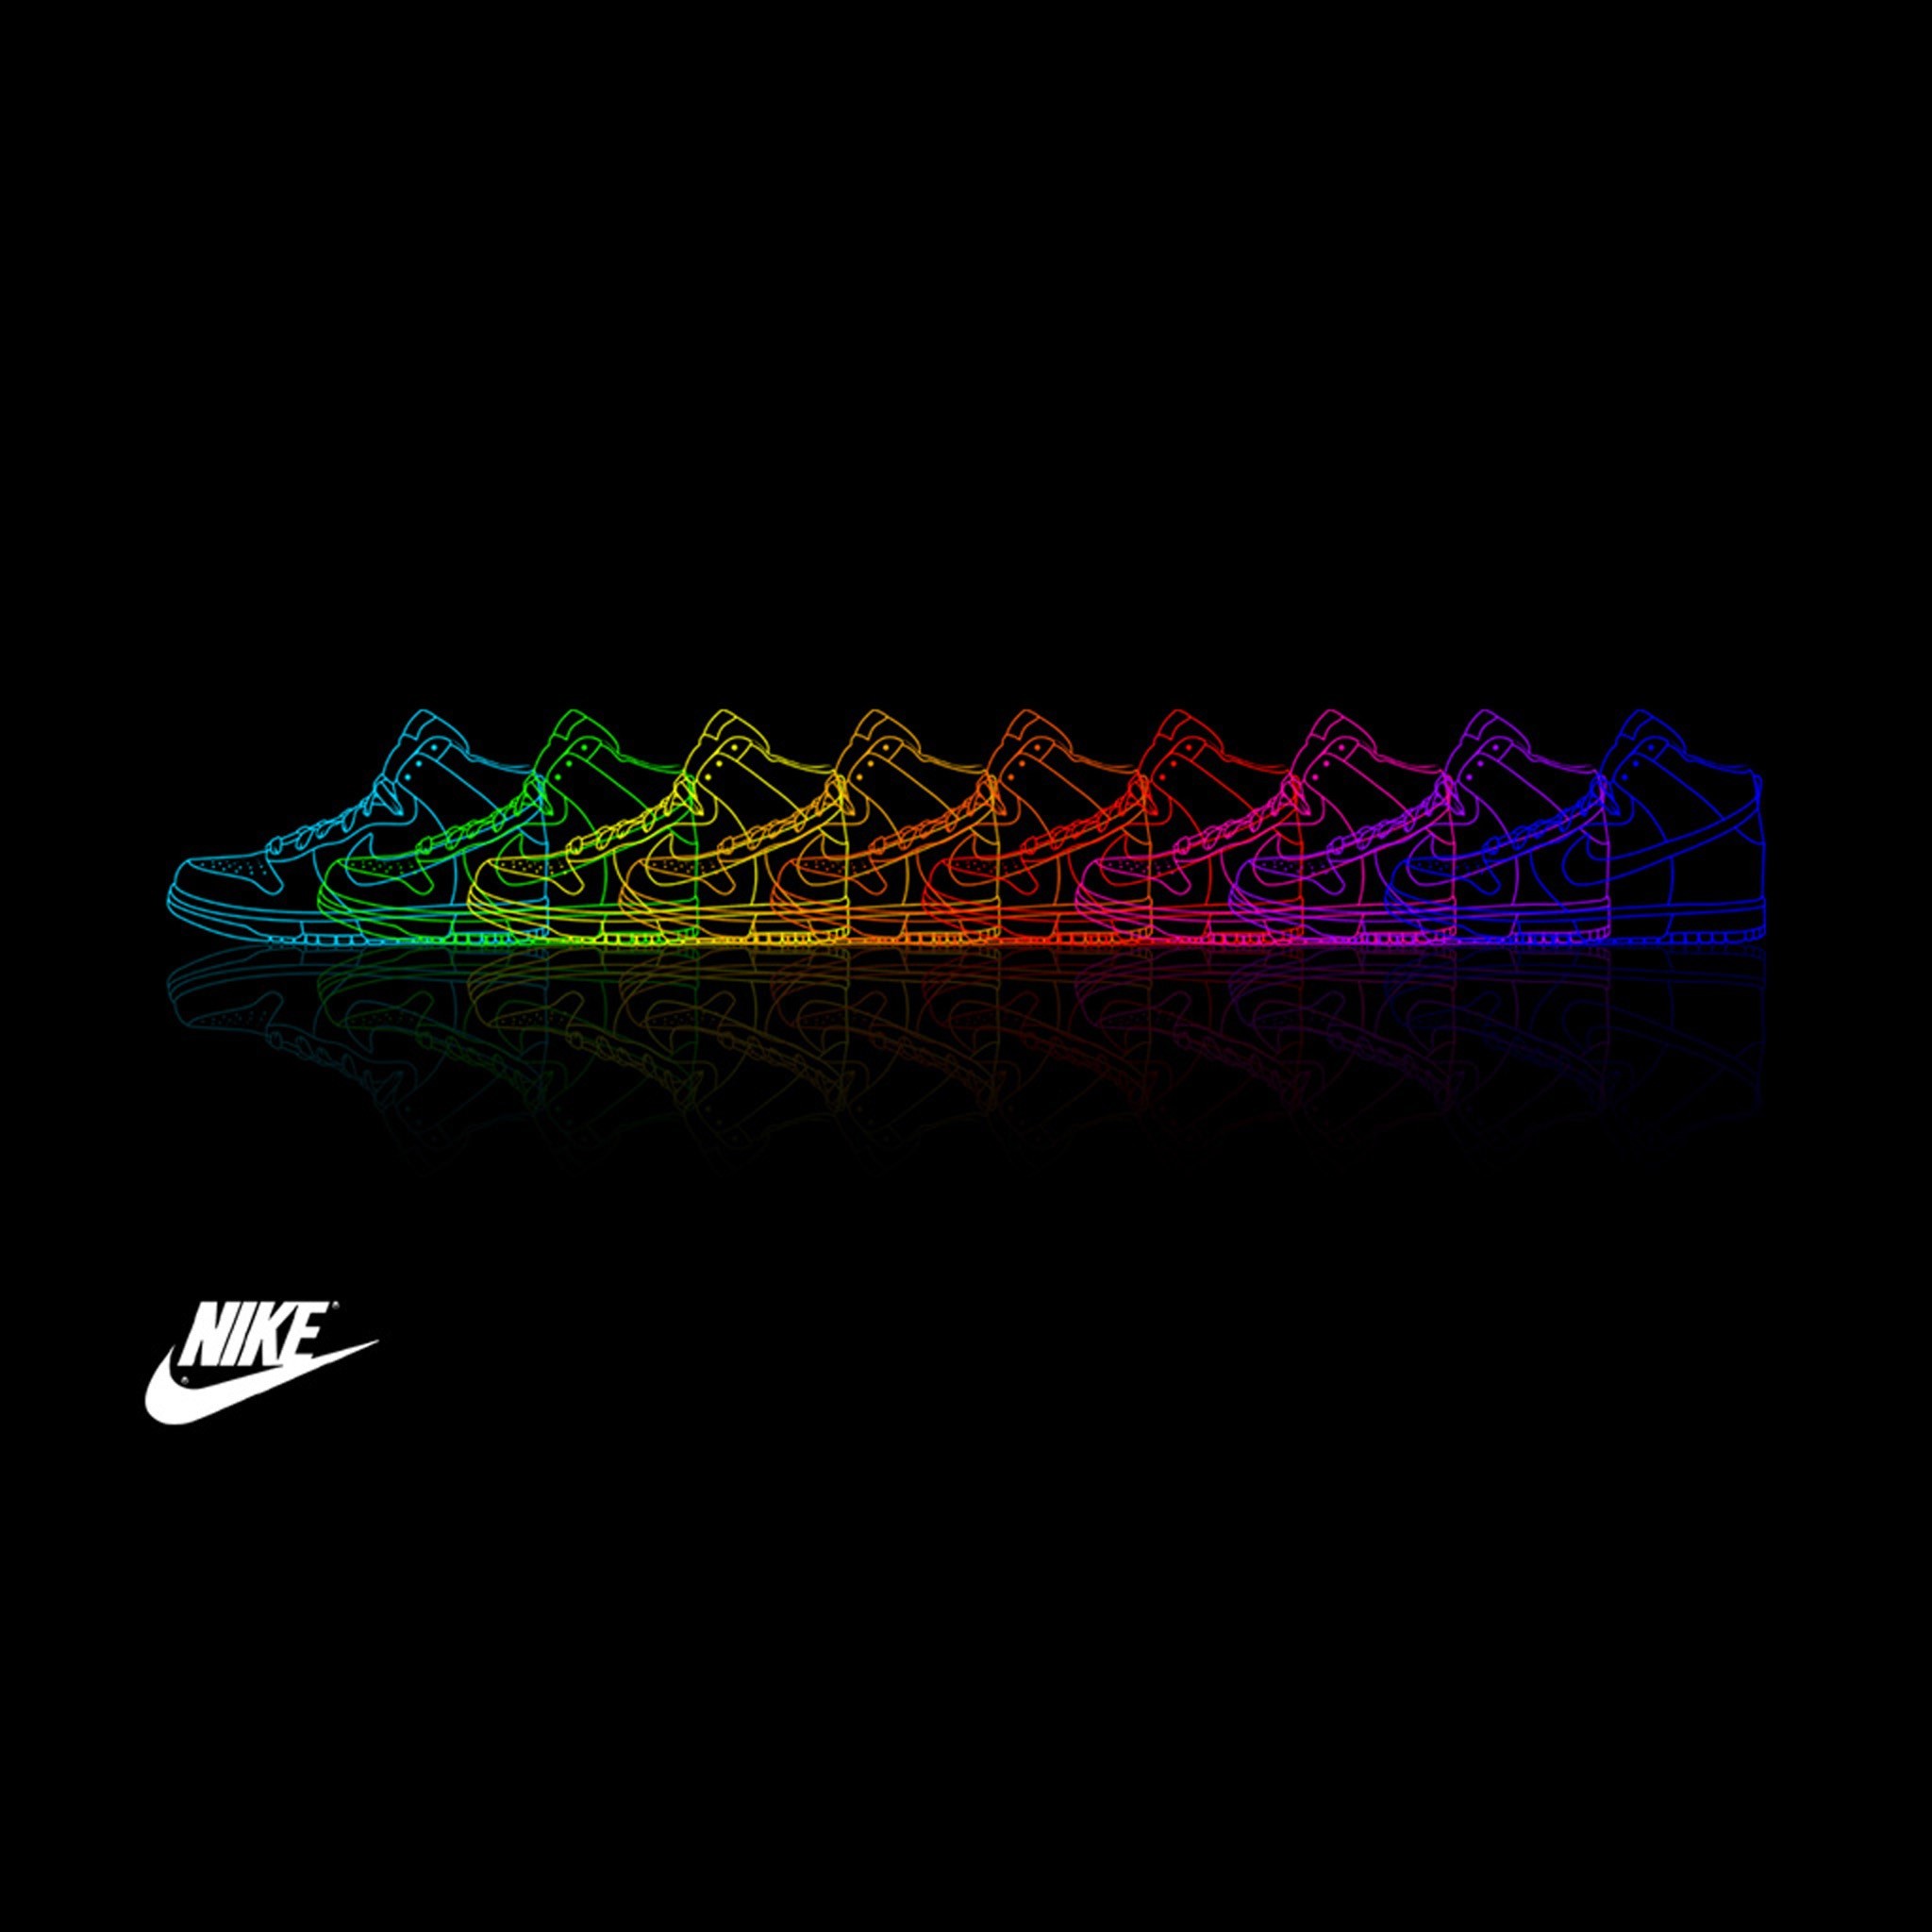 2048x2048 #16542, High Resolution Wallpapers = nike logo backround